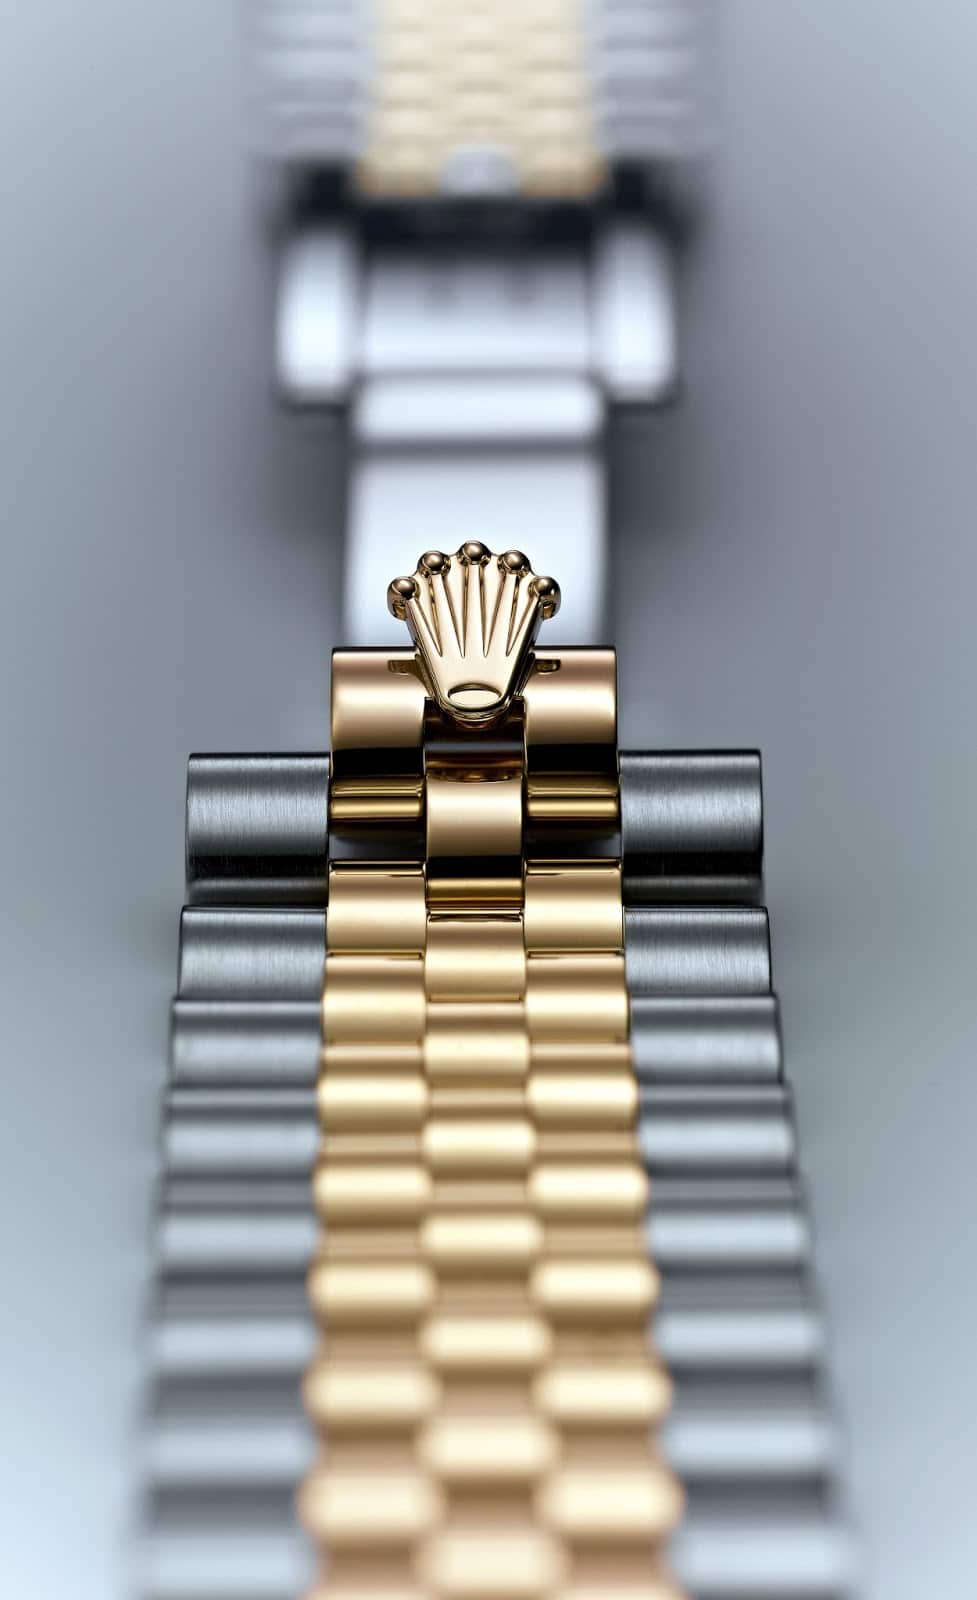 crown on the watches